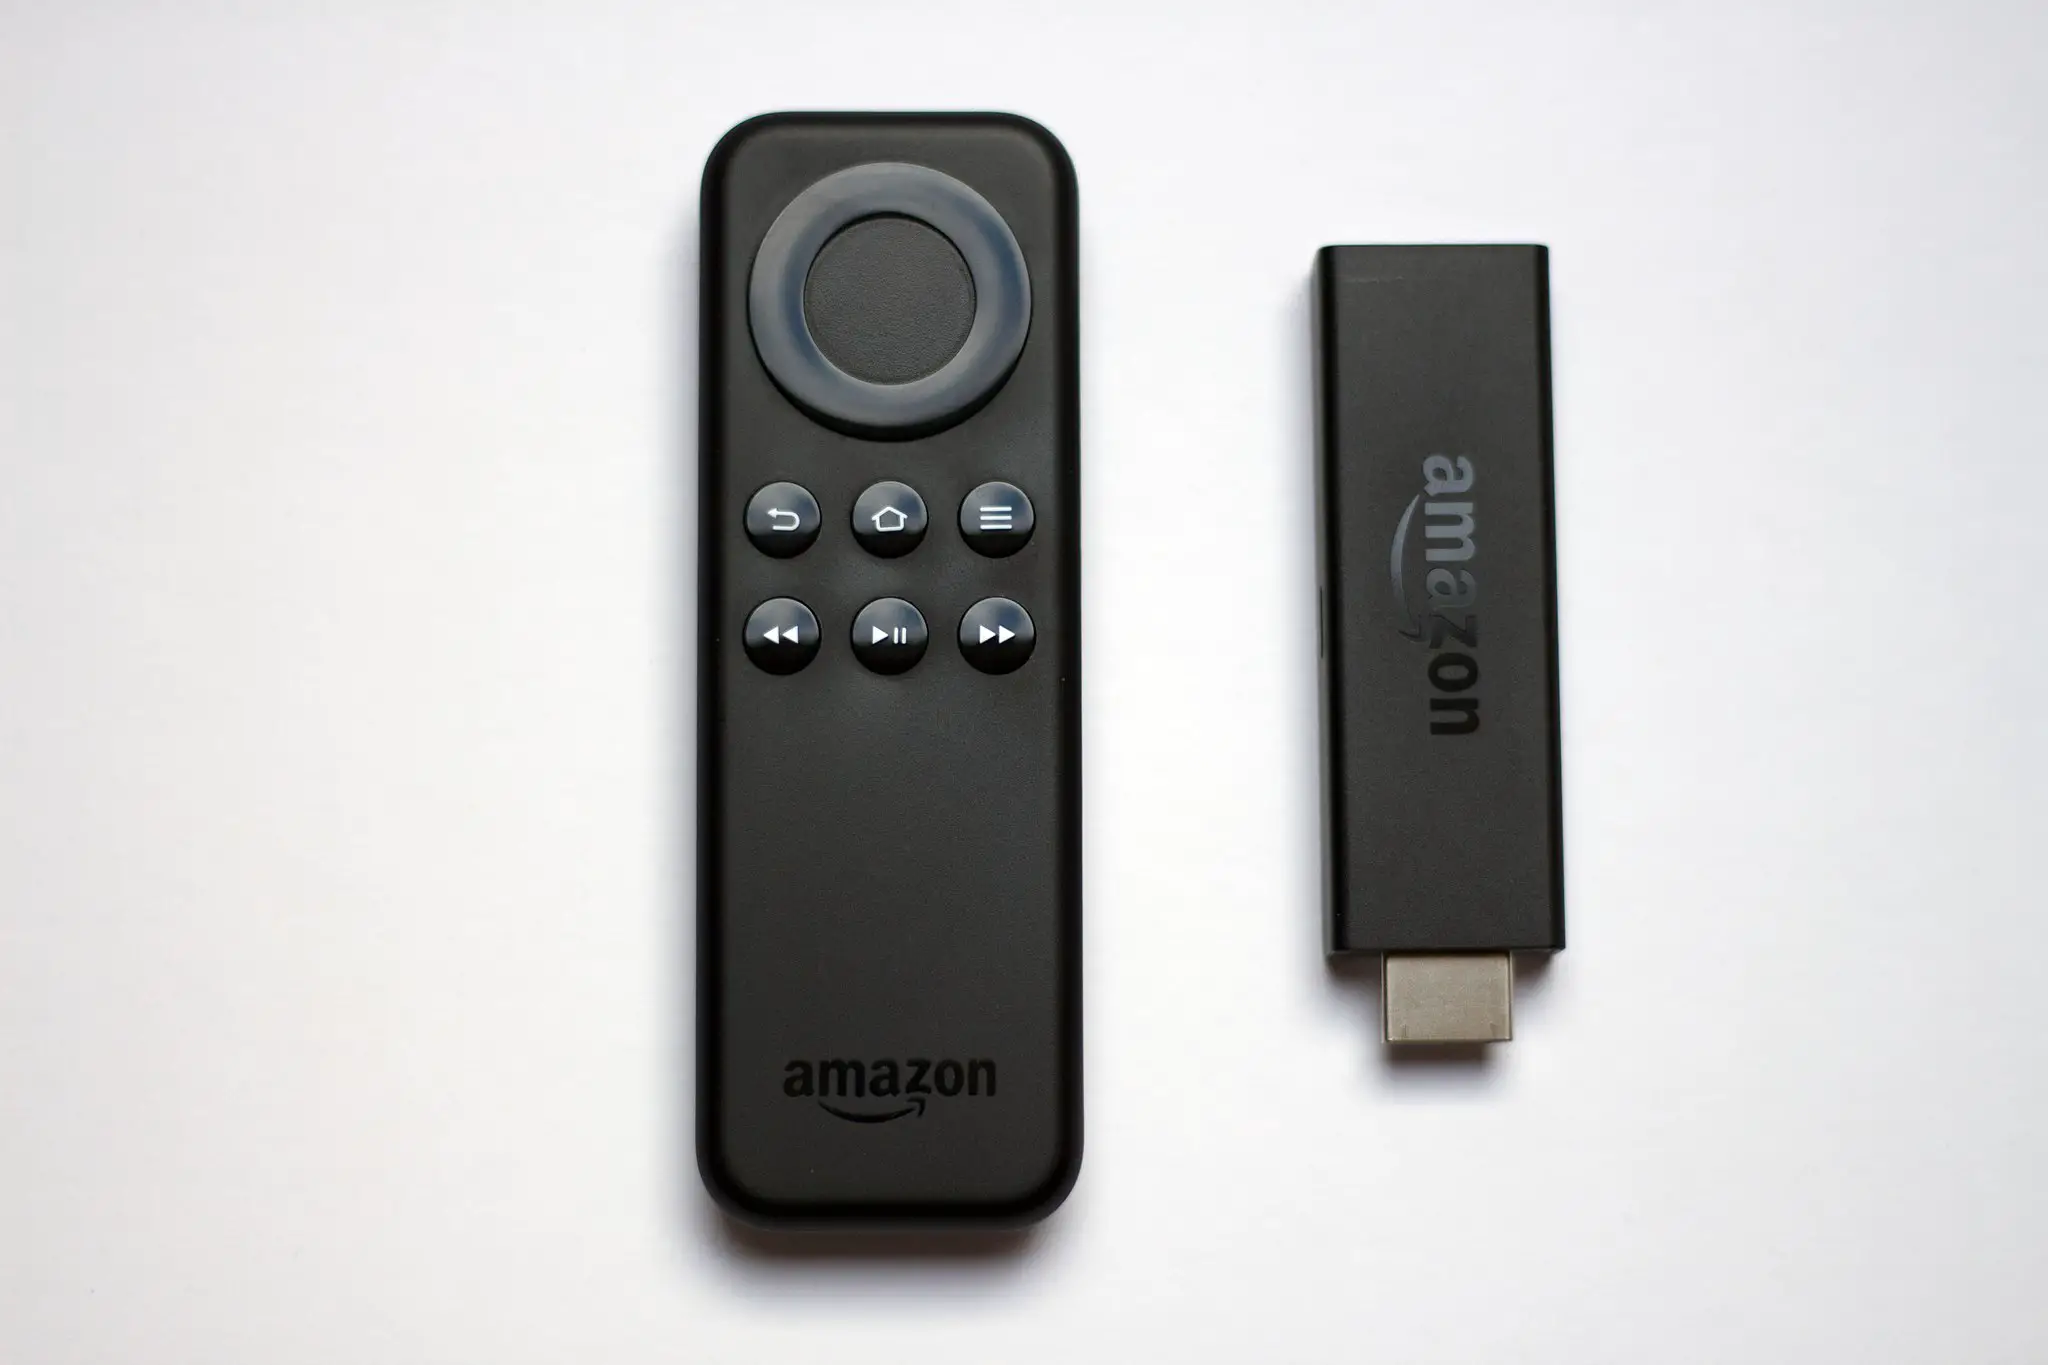 https://commons.wikimedia.org/wiki/File:Fire-TV_Stick_and_Remote.jpg